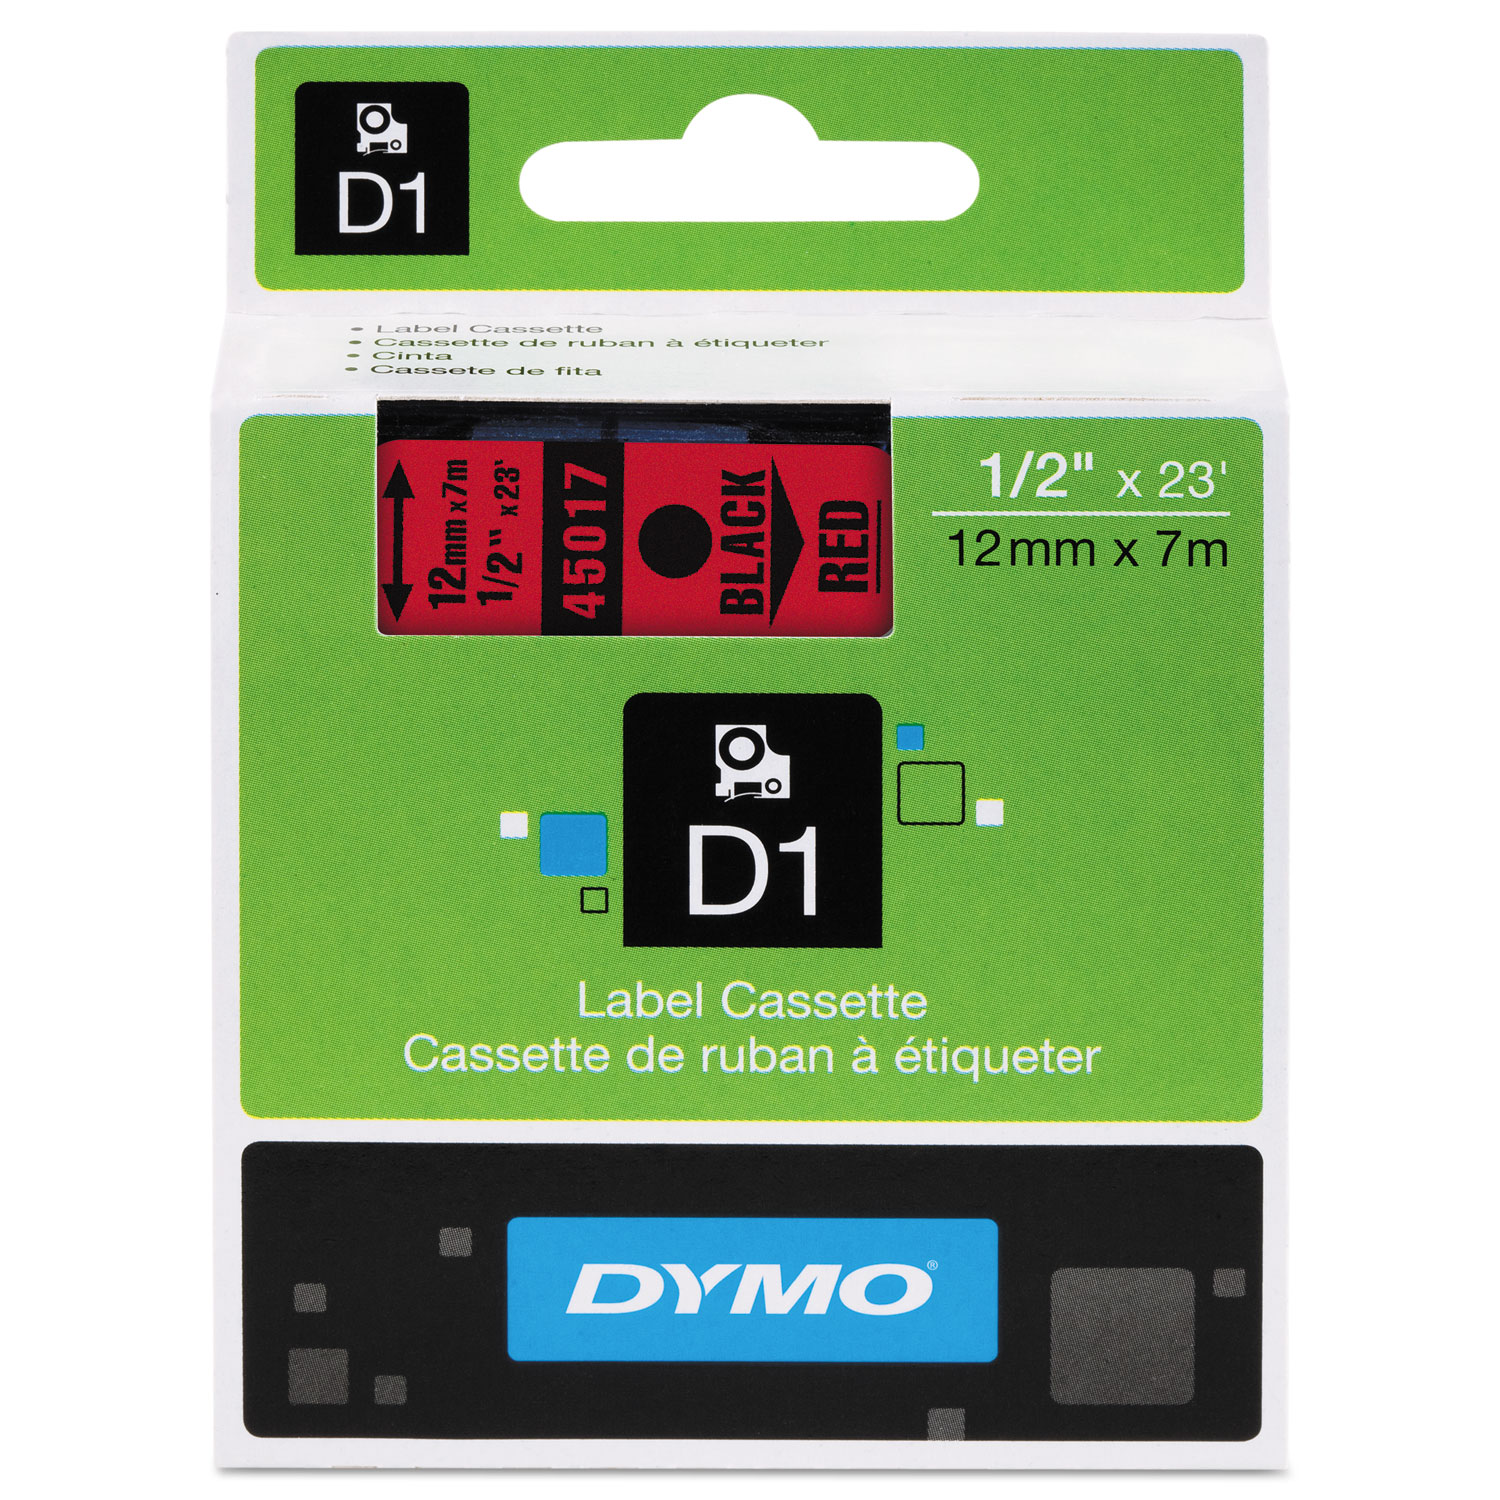  DYMO 45017 D1 High-Performance Polyester Removable Label Tape, 0.5 x 23 ft, Black on Red (DYM45017) 